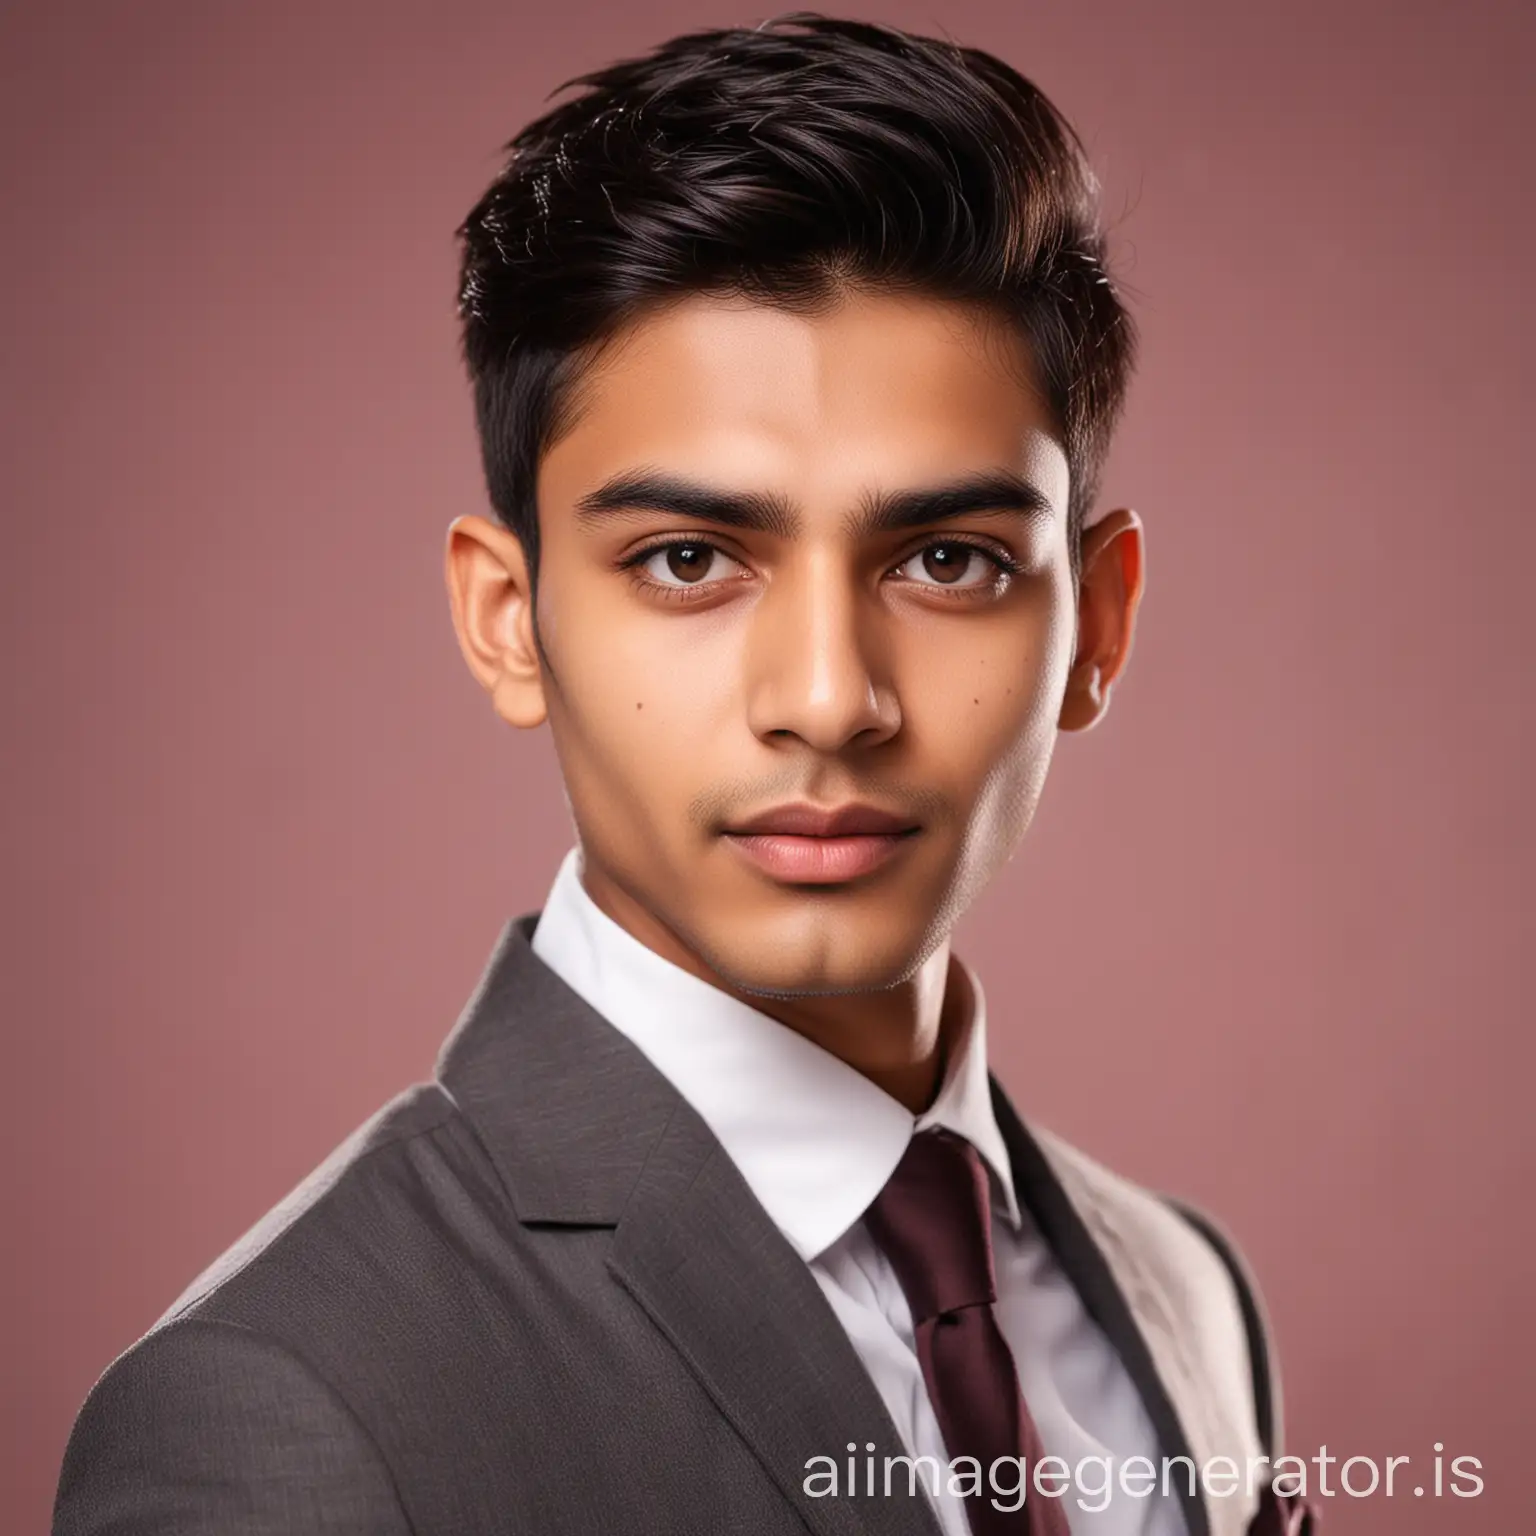 24 year old Indian teen male slightly acne scar fair skin with skinny neck slightly lighter tone posing for a LinkedIn photo in formal wear solid and light forming in bokeh redlight office background wearing formals with Brushed-back Scissor Crop haircut